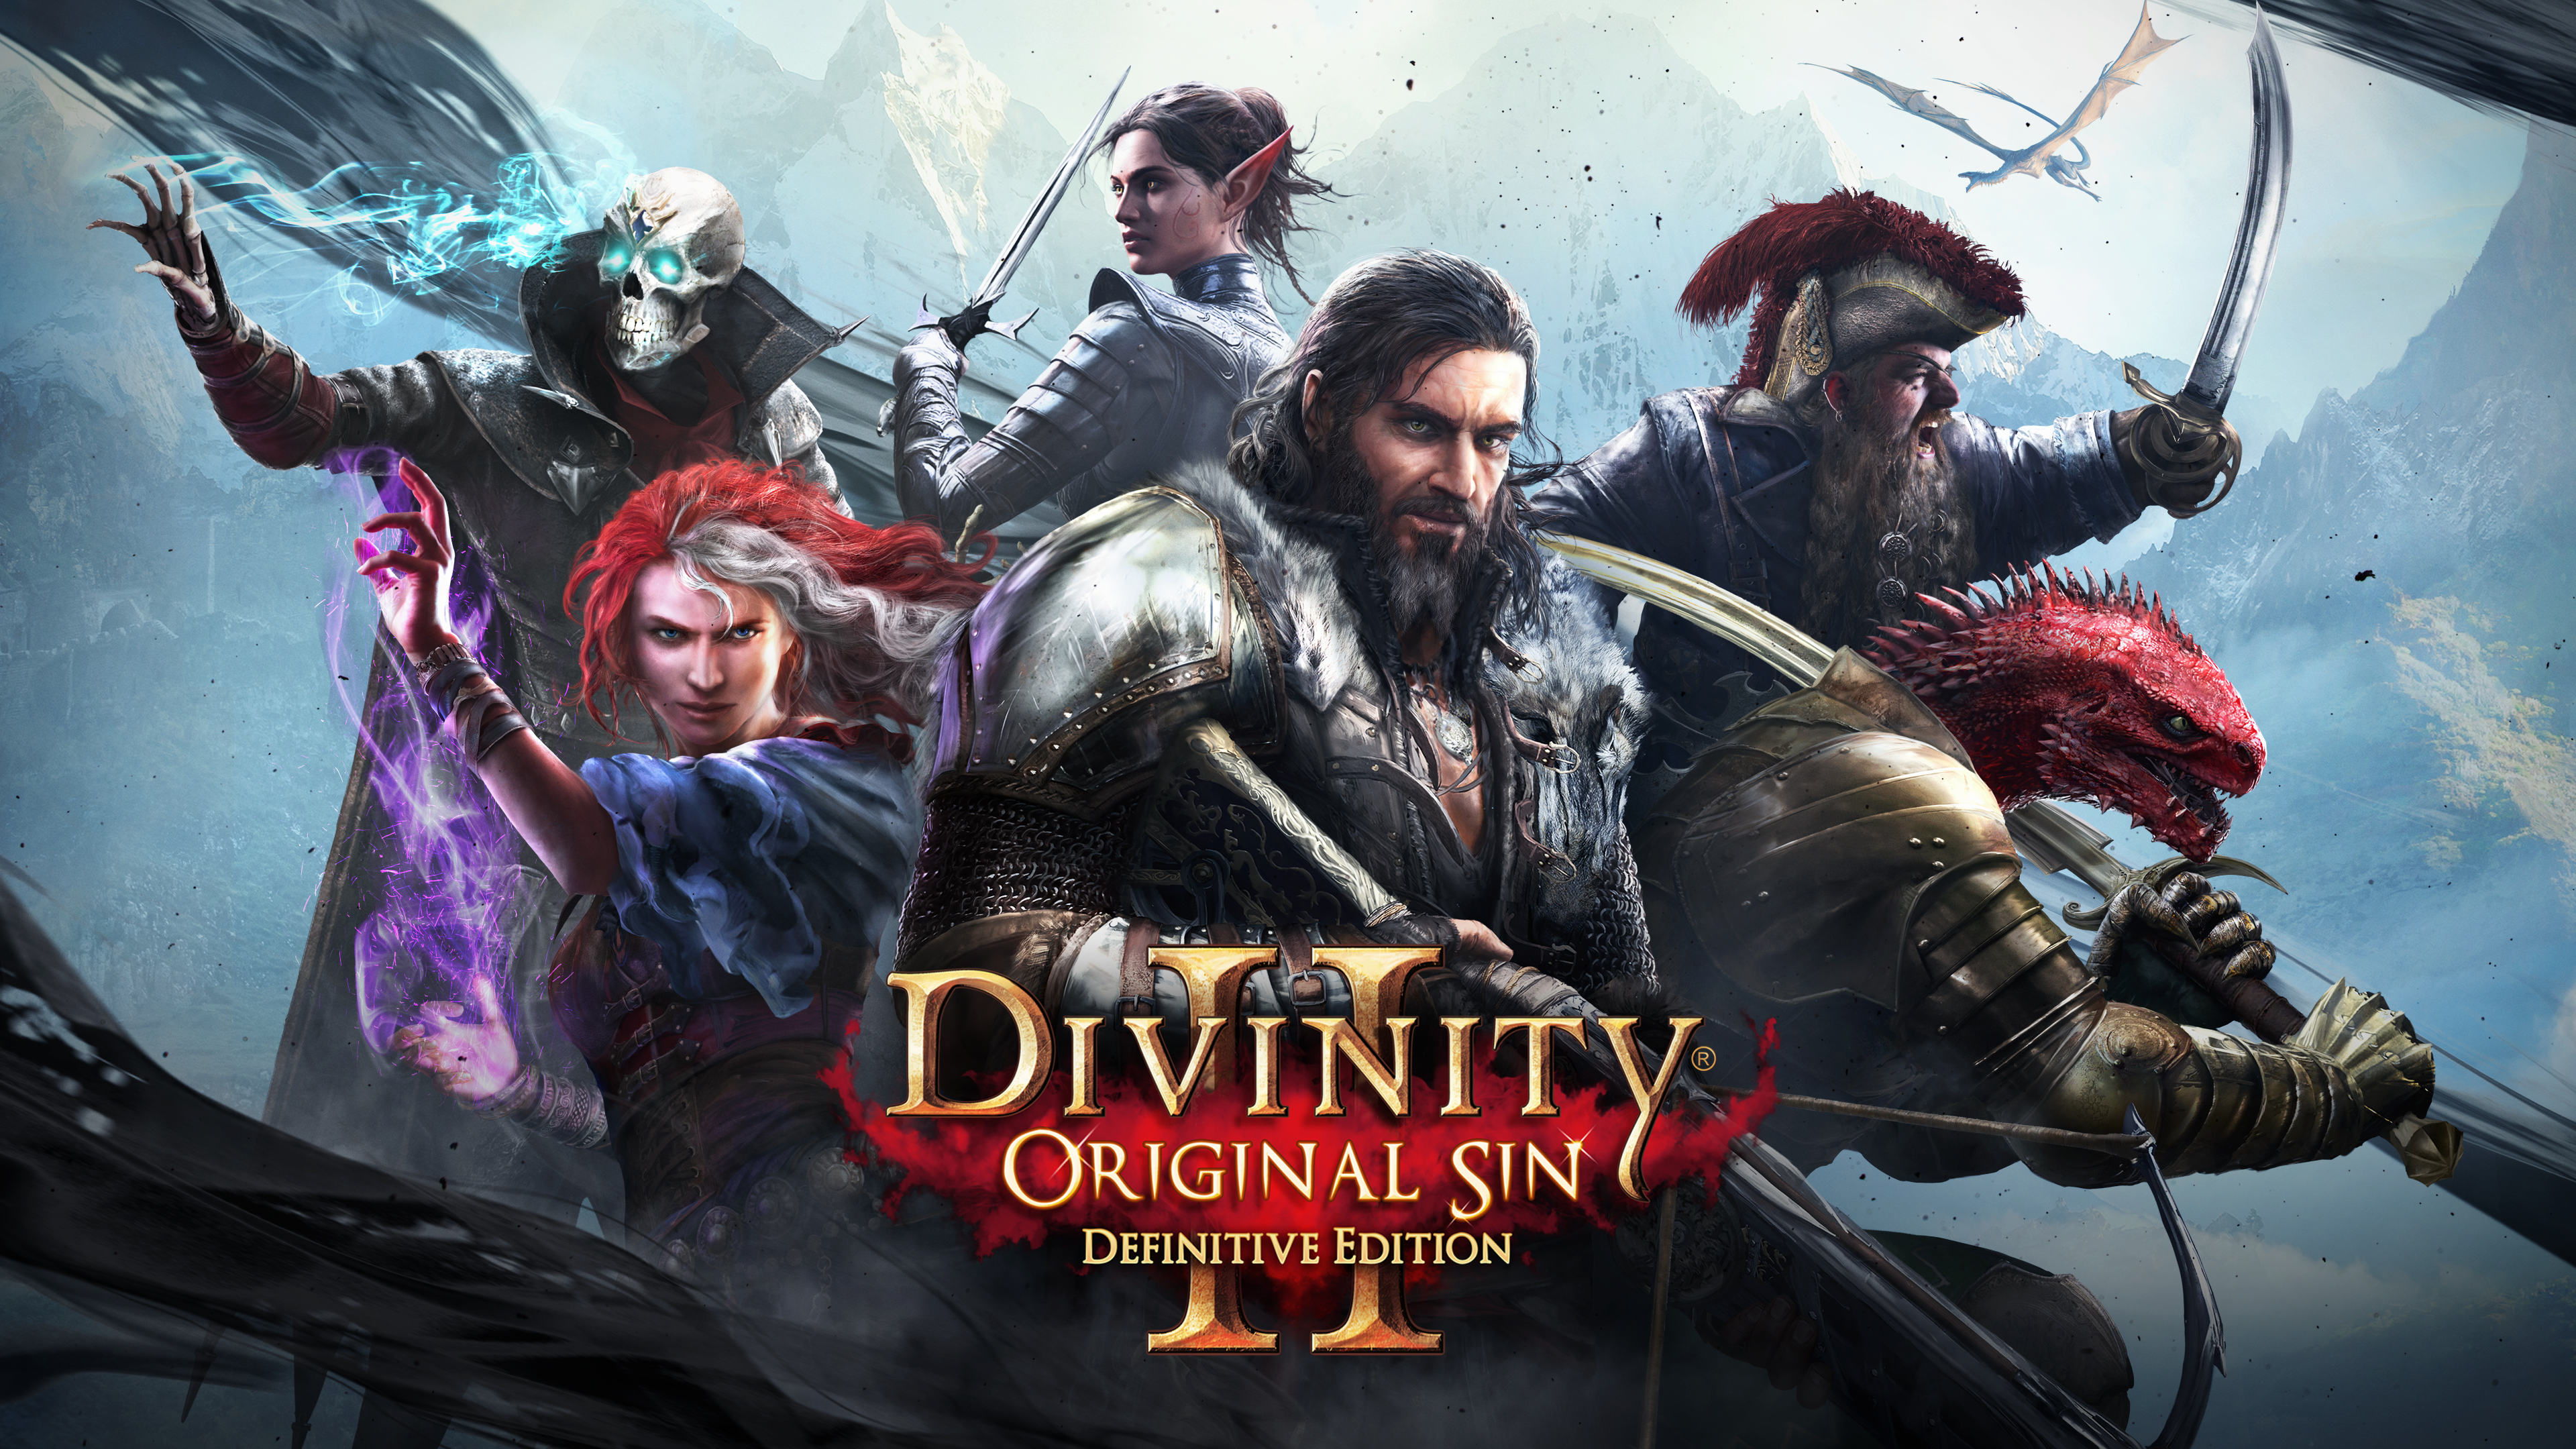 HD wallpaper featuring characters from Divinity: Original Sin II Definitive Edition, perfect for desktop background.